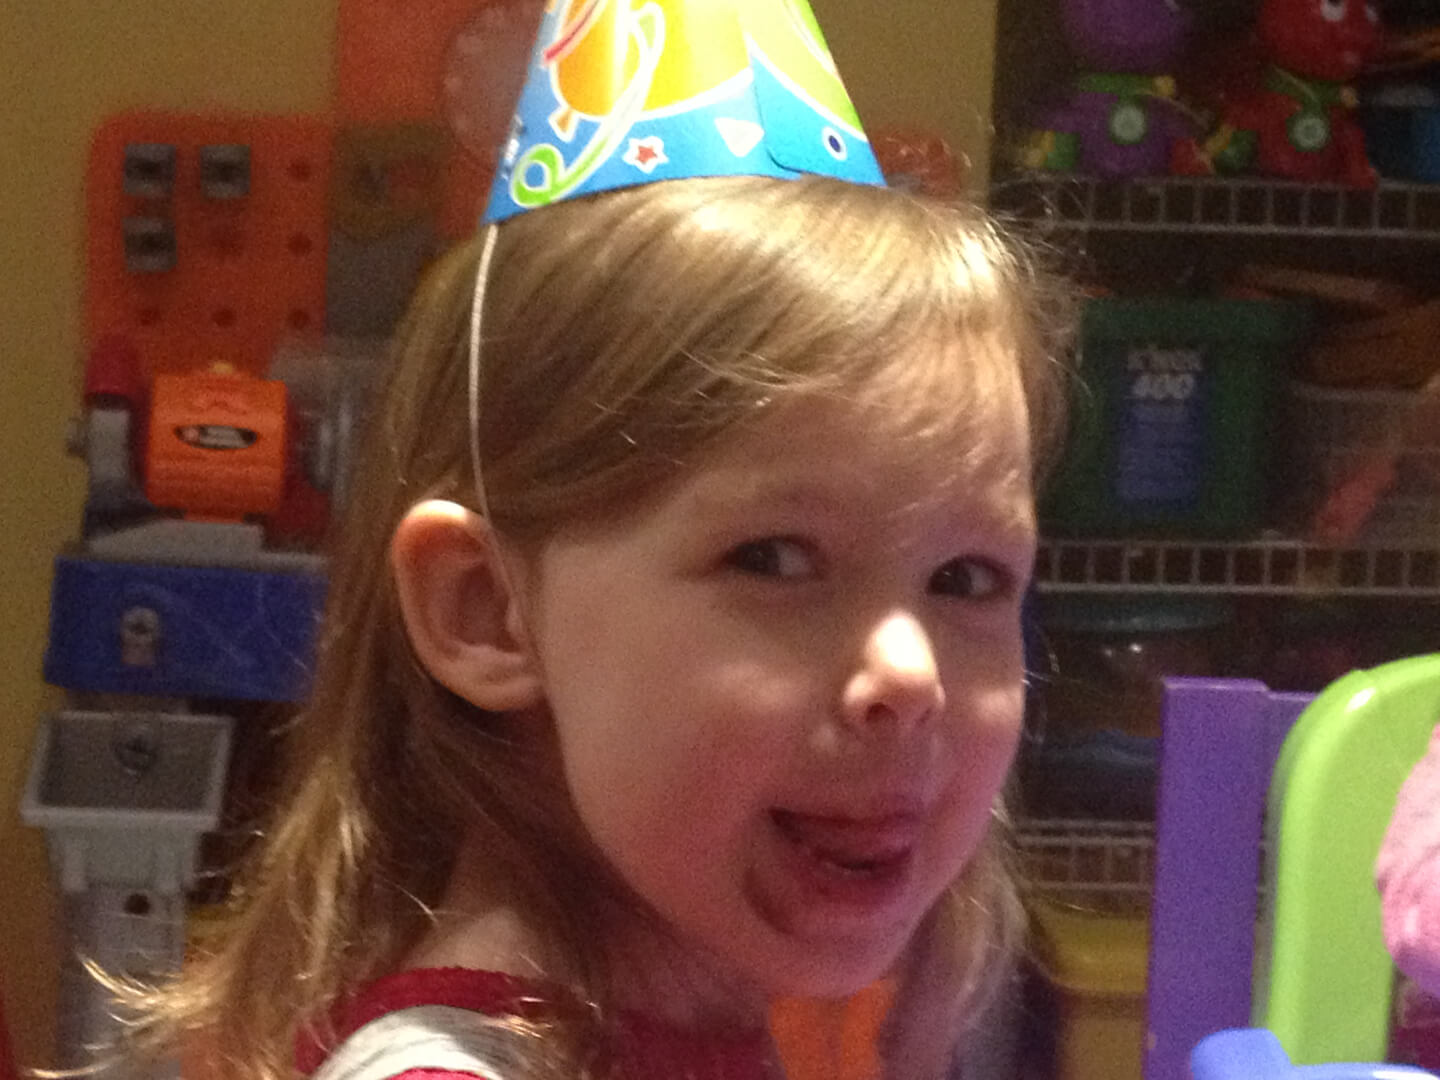 Young girl with a birthday hat licking her lips